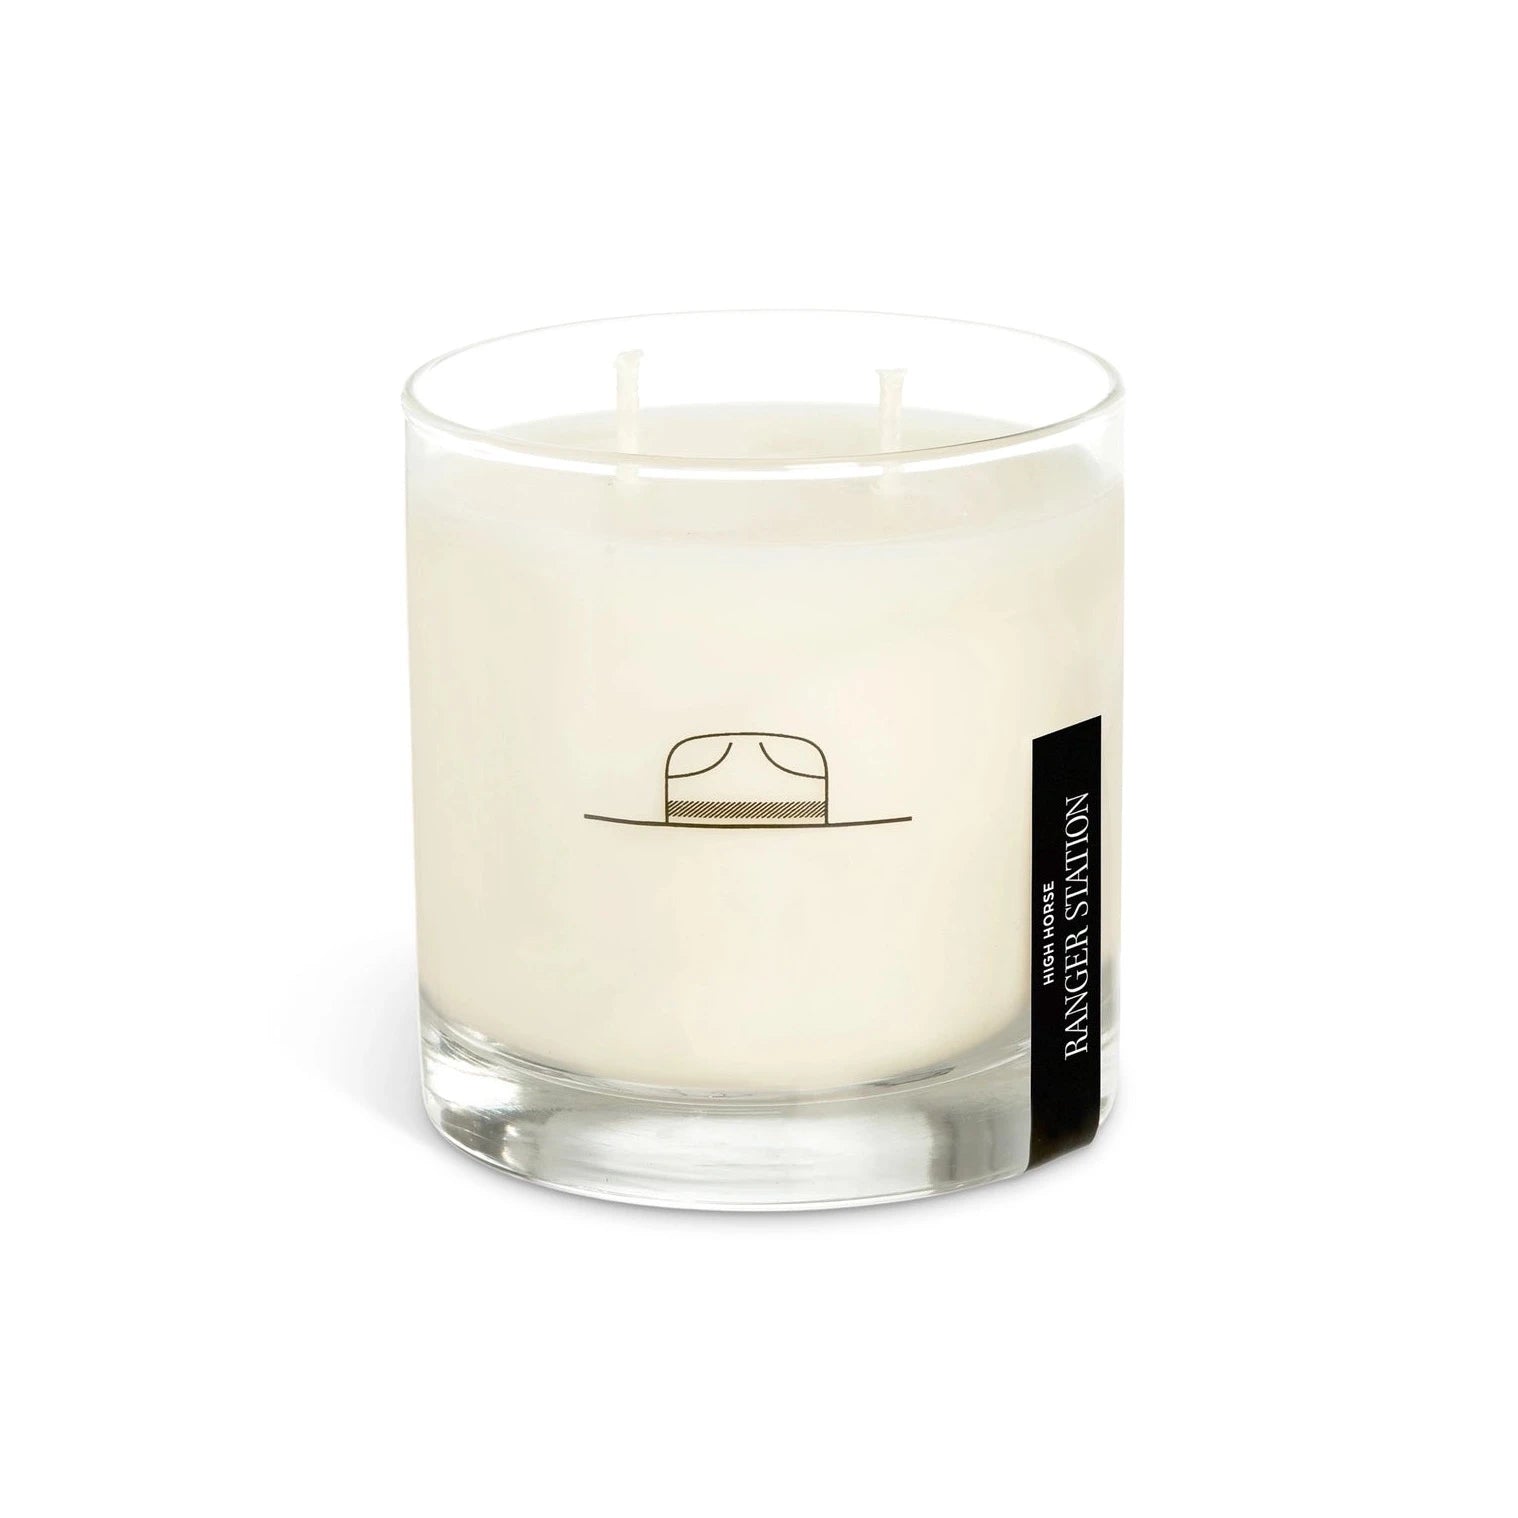 white candle with black illustration on the front . has black label on the right hand side